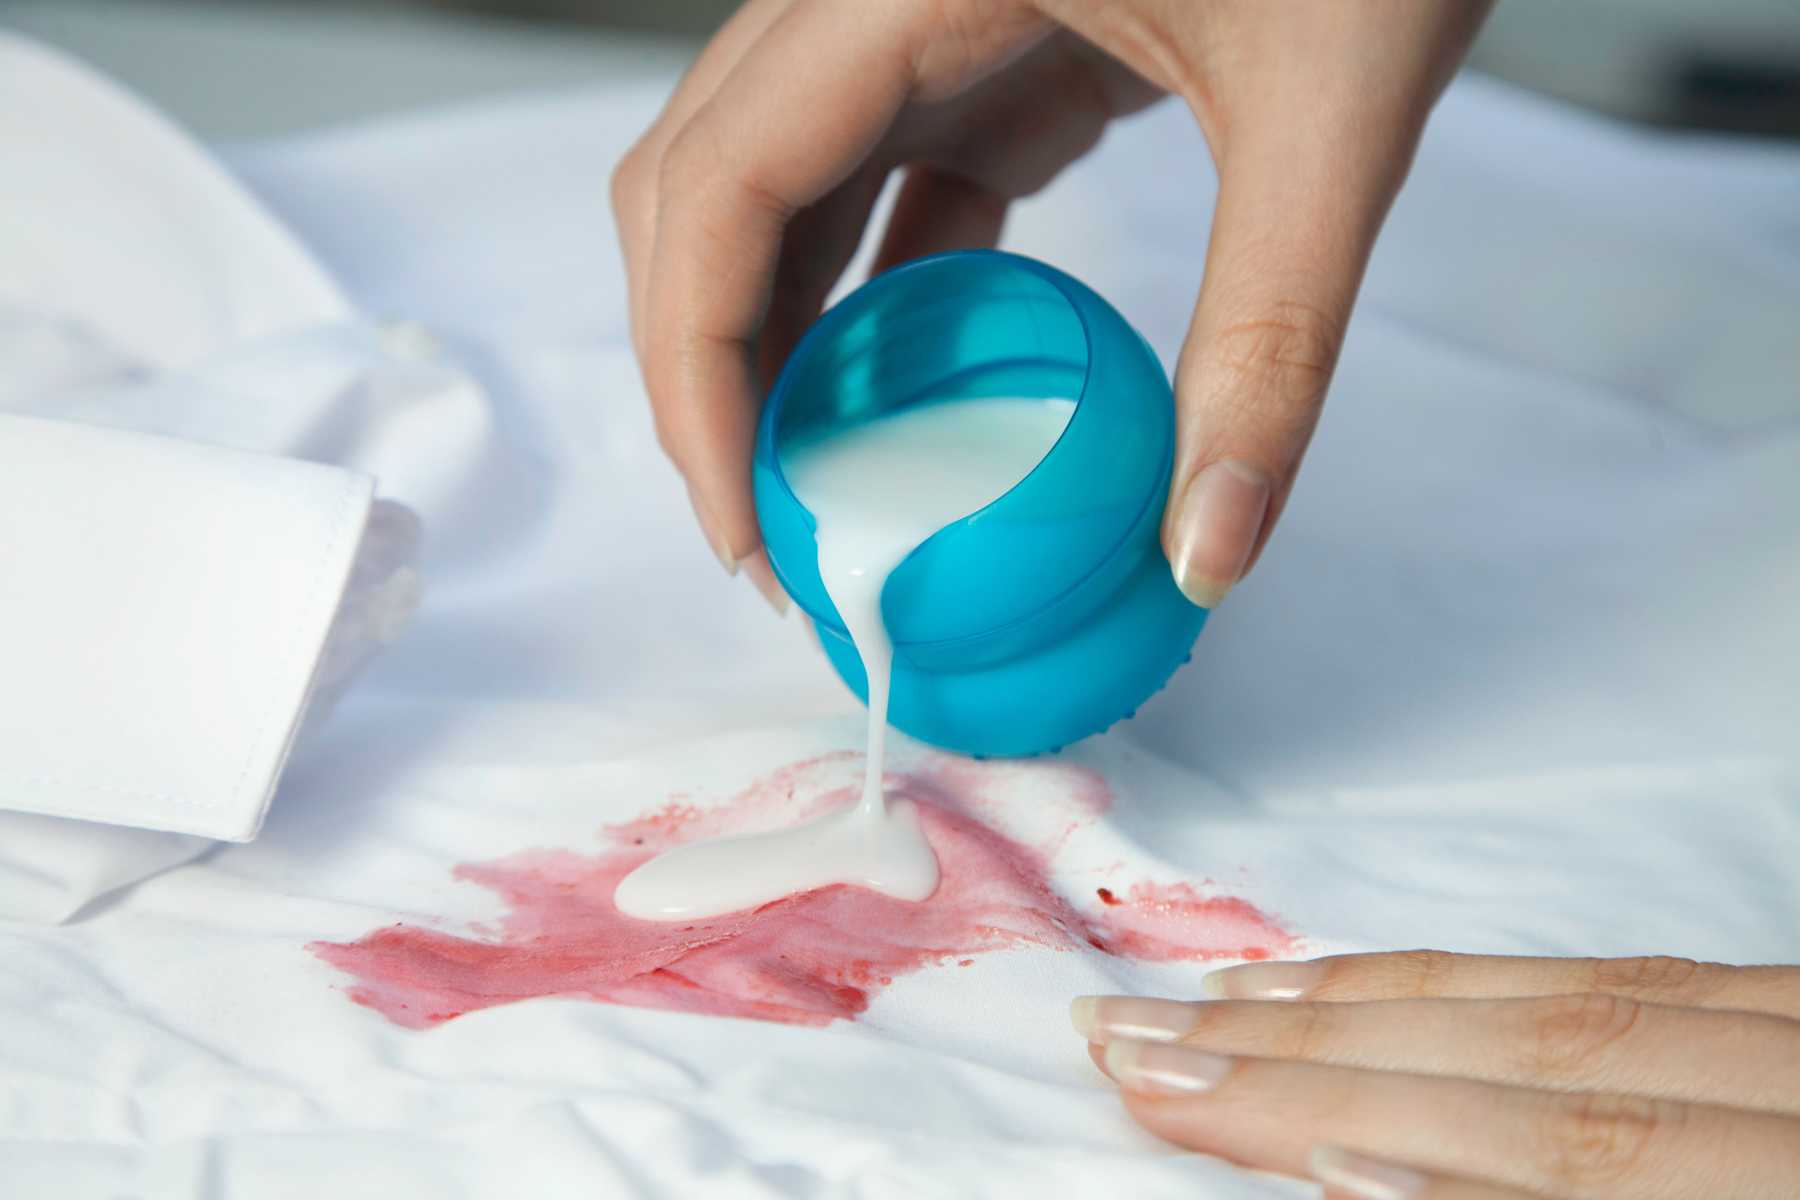 How To Get Stains Out Of White Clothes